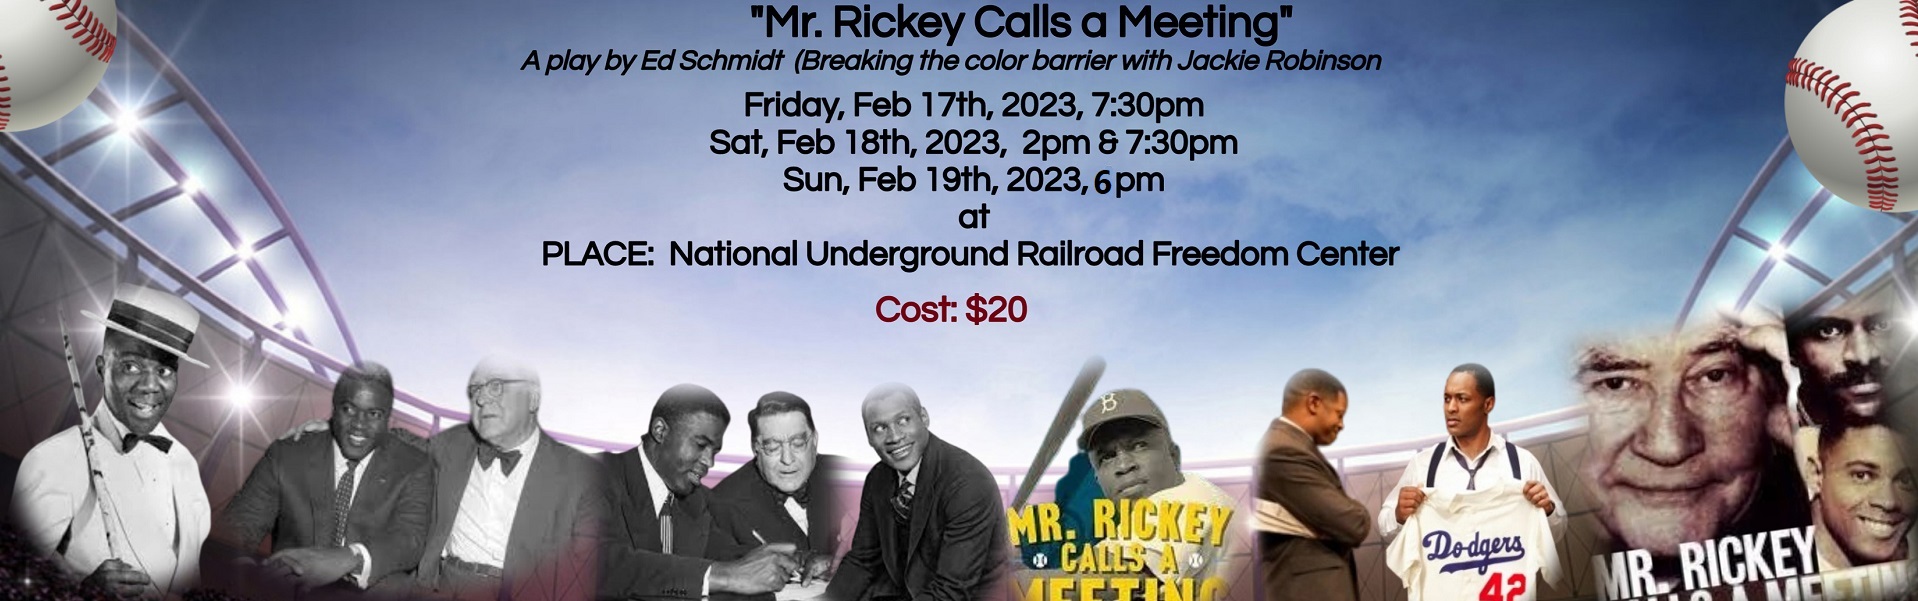 Mr. Ricky Calls a Meeting